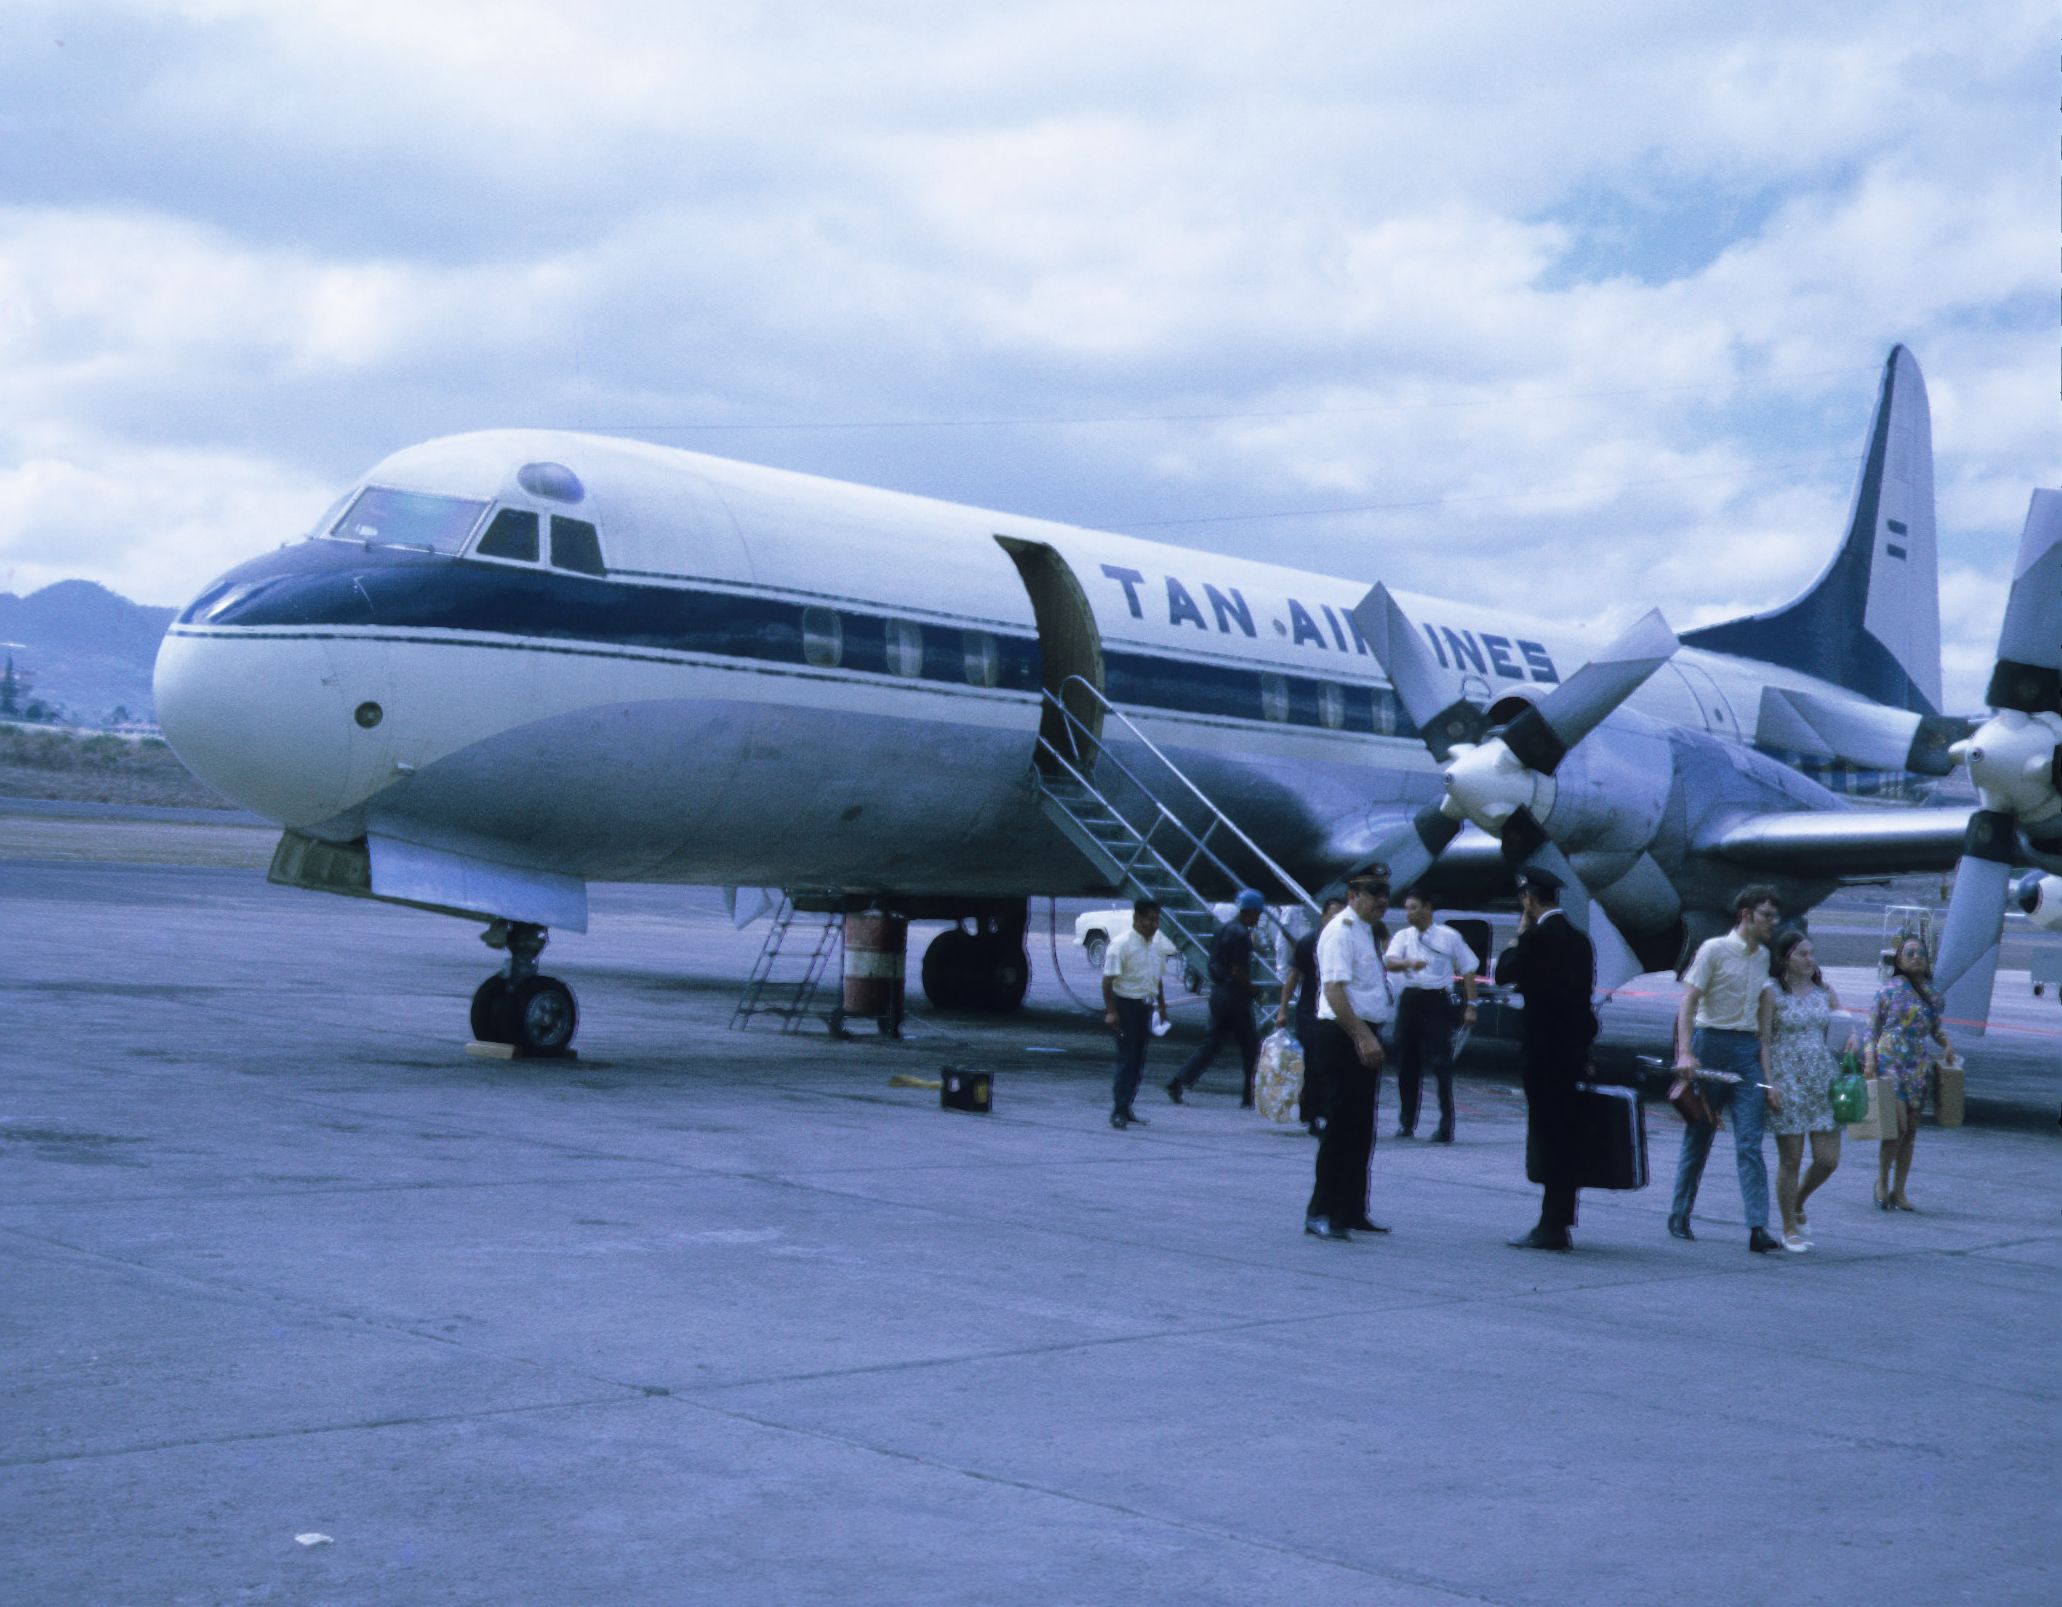 Lockheed_L-188_Electra_(TAN_Airlines_1970)